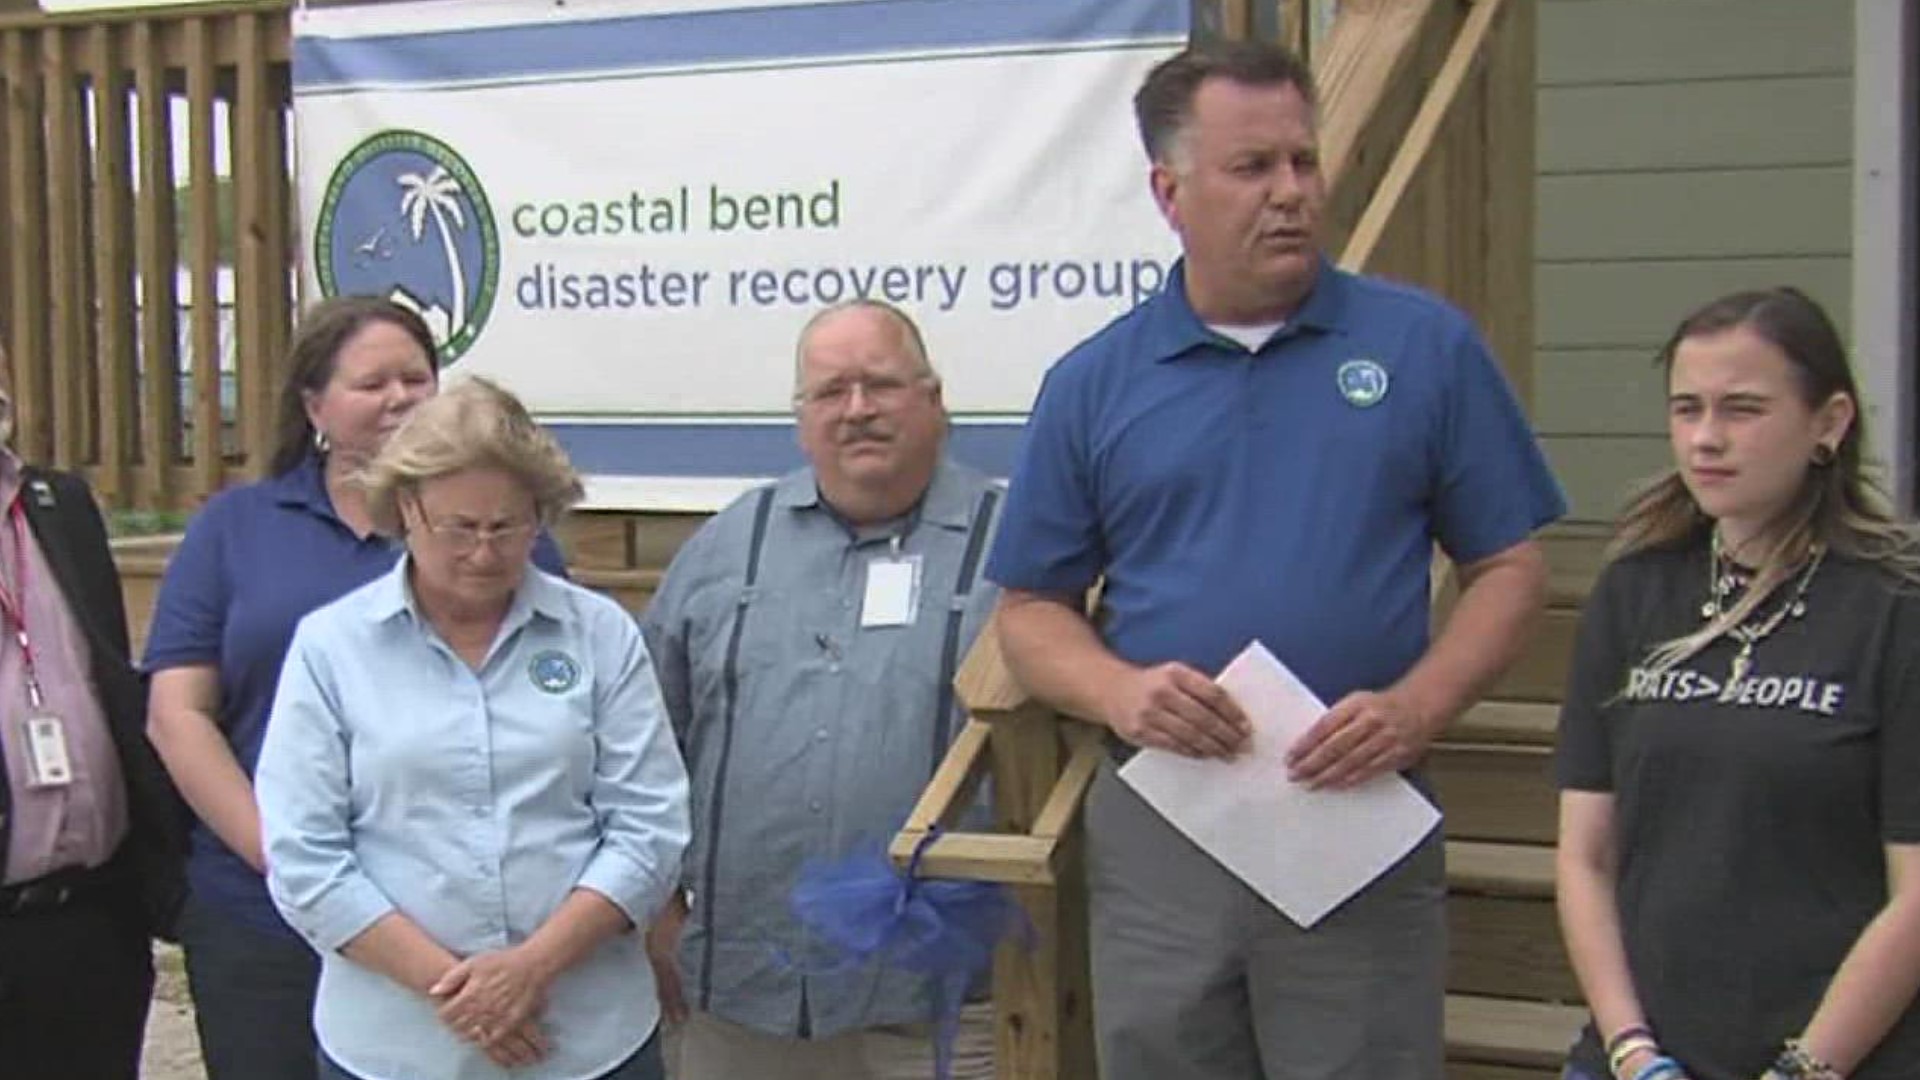 The CBDRG has helped to rebuild 160 homes that were destroyed by Harvey.